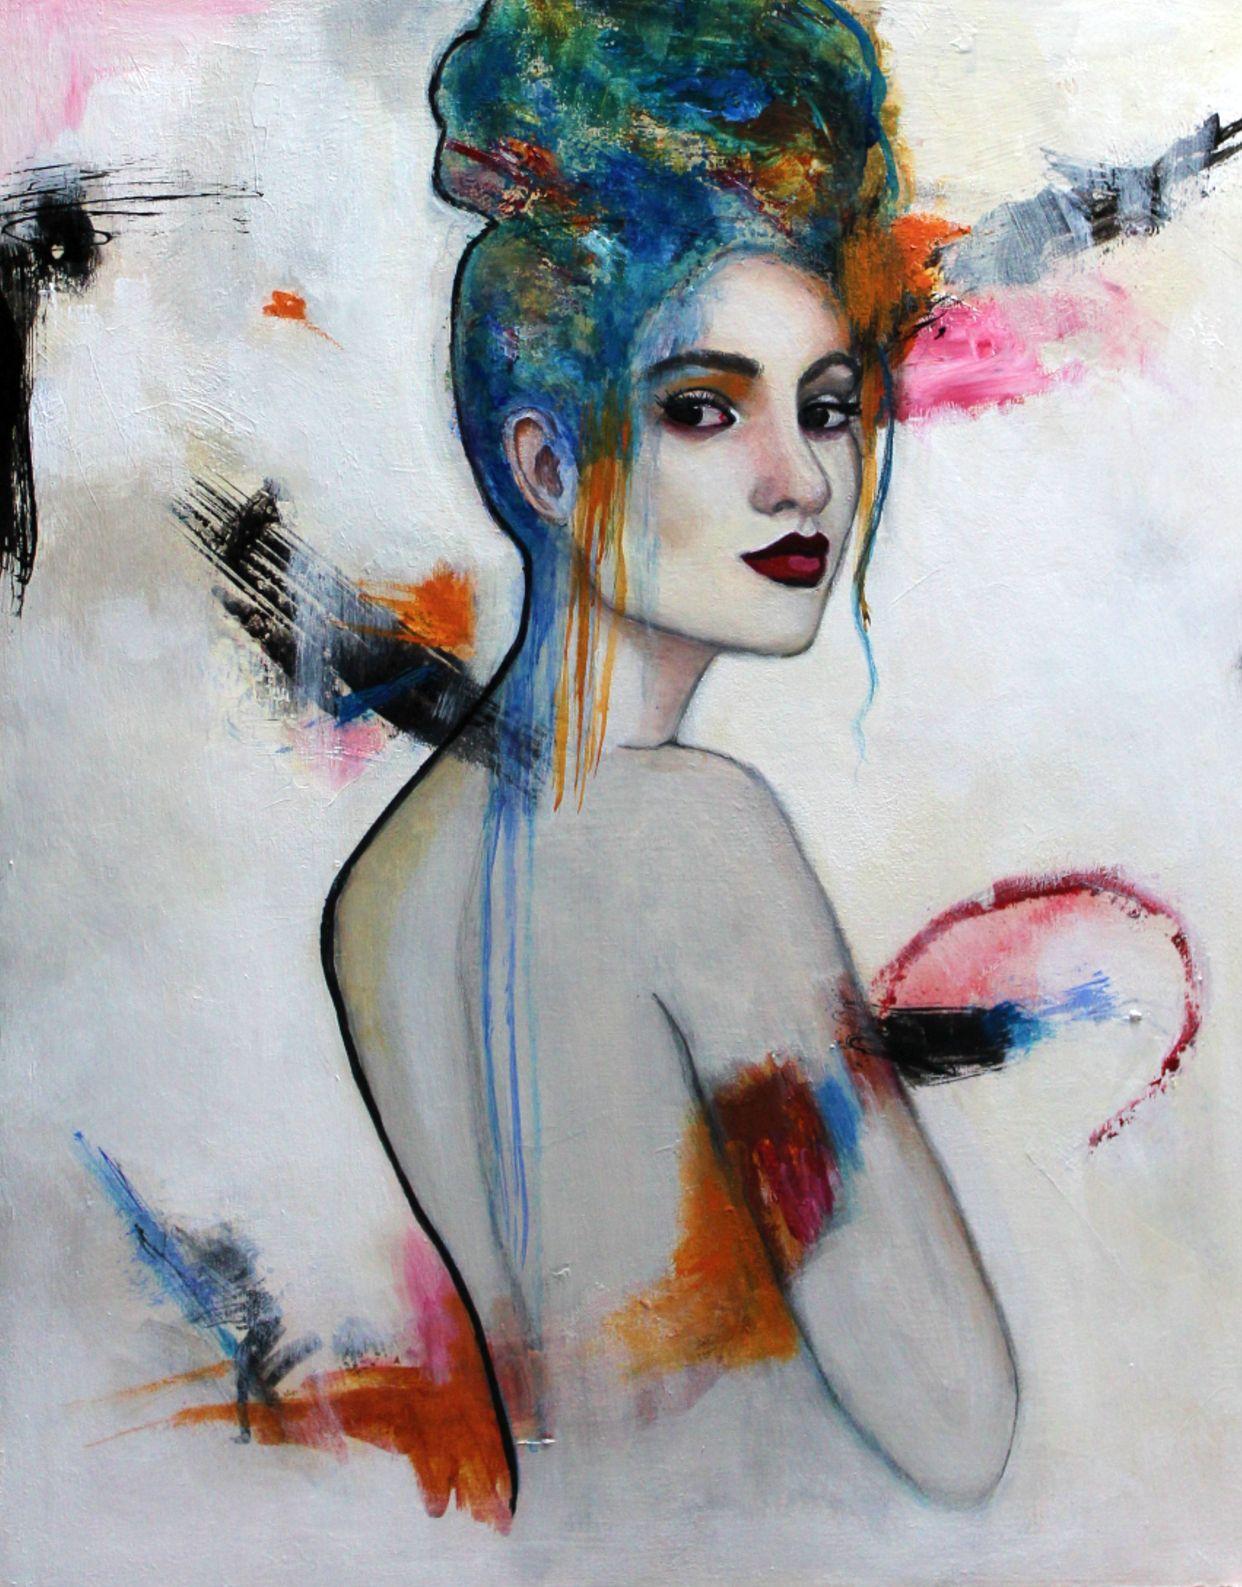 I'm never going to look back, Mixed Media on Wood Panel - Mixed Media Art by Haydee Torres